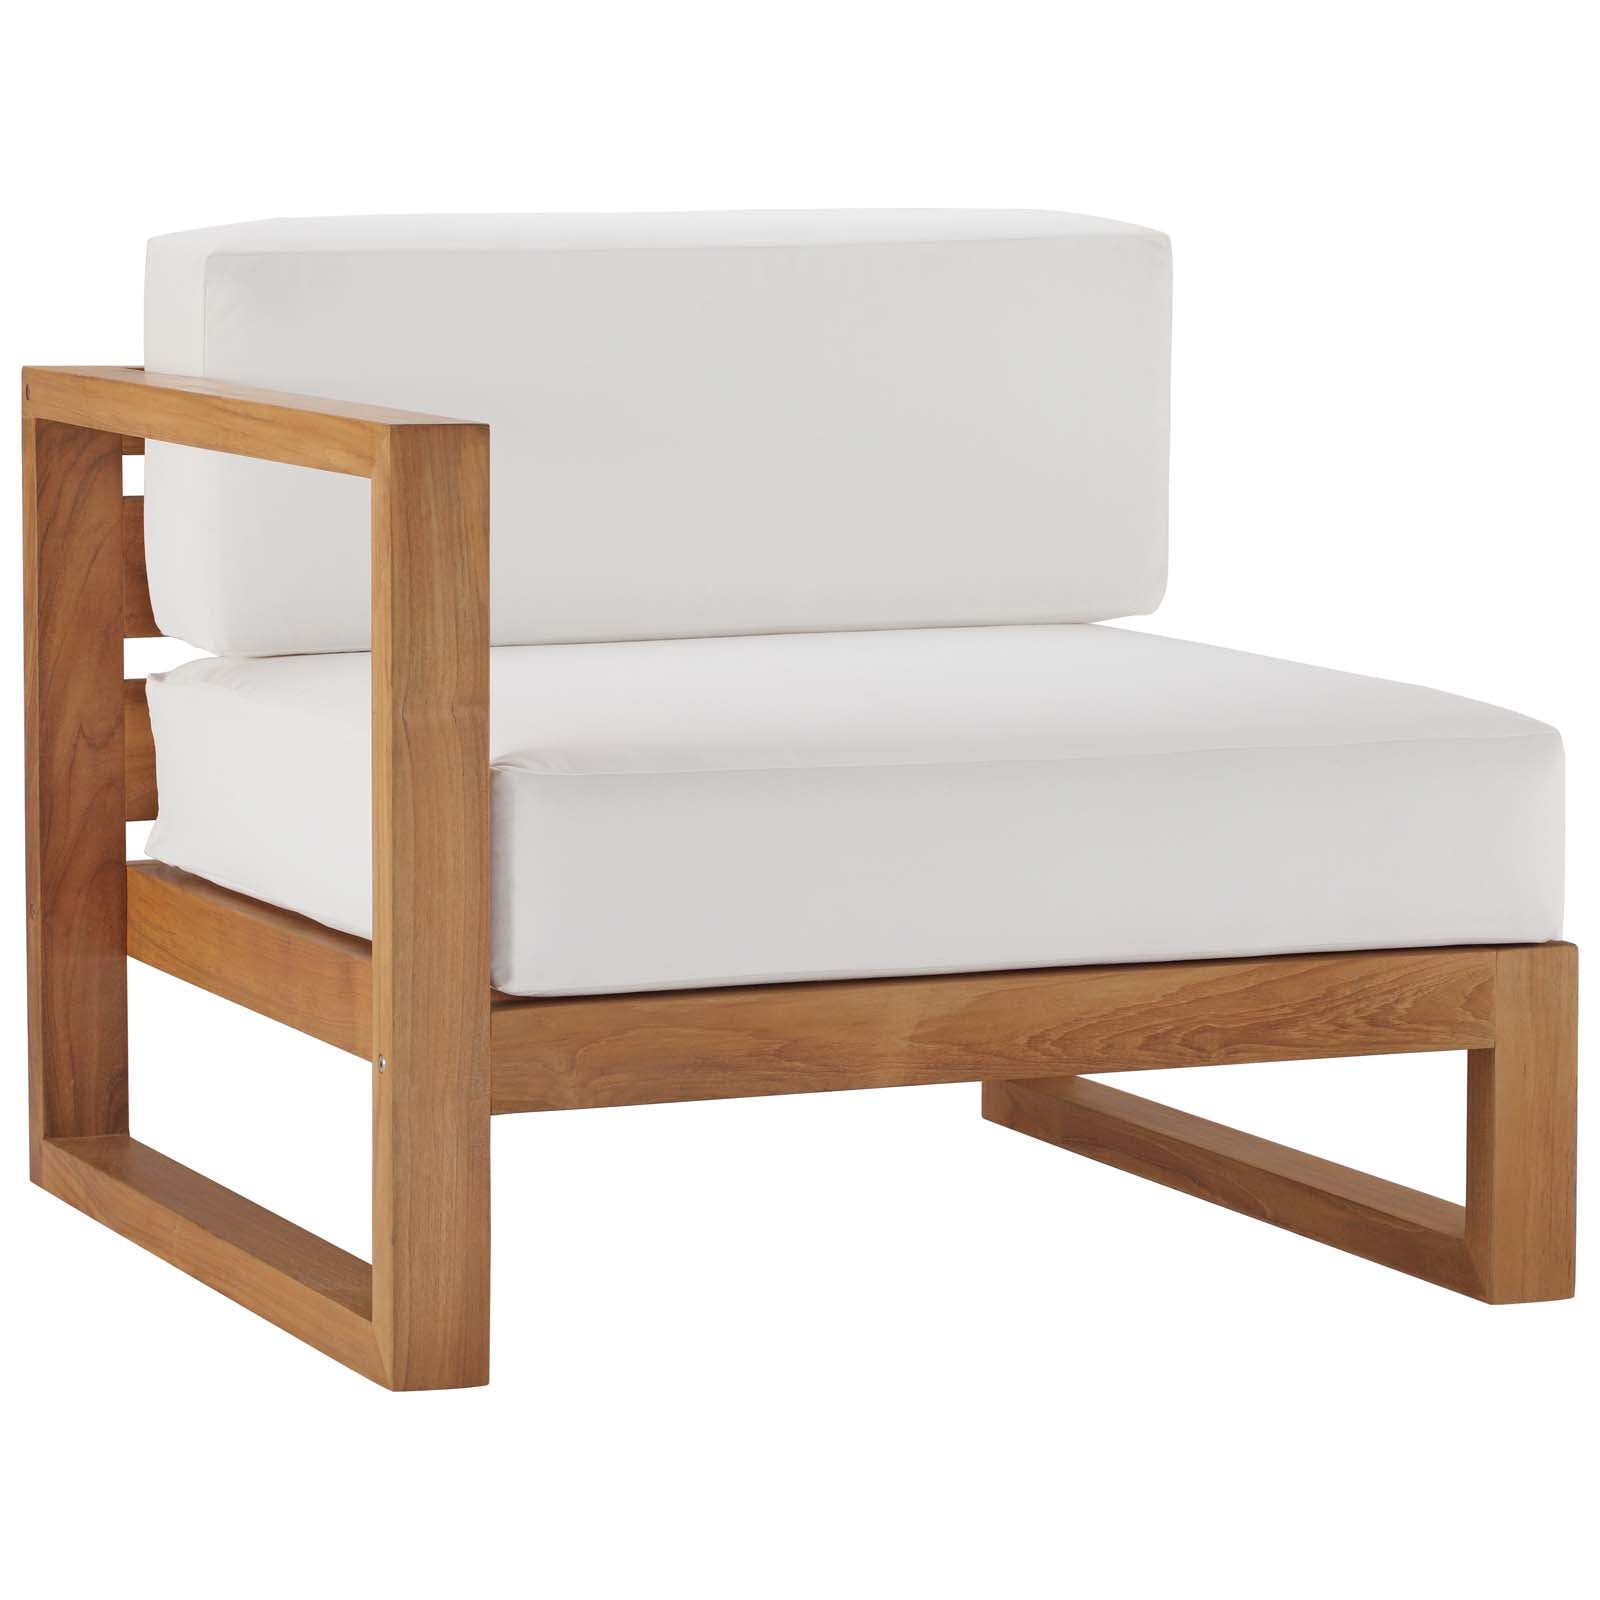 Modway Outdoor Chairs - Upland Outdoor Patio Teak Wood Left Arm Chair Natural White